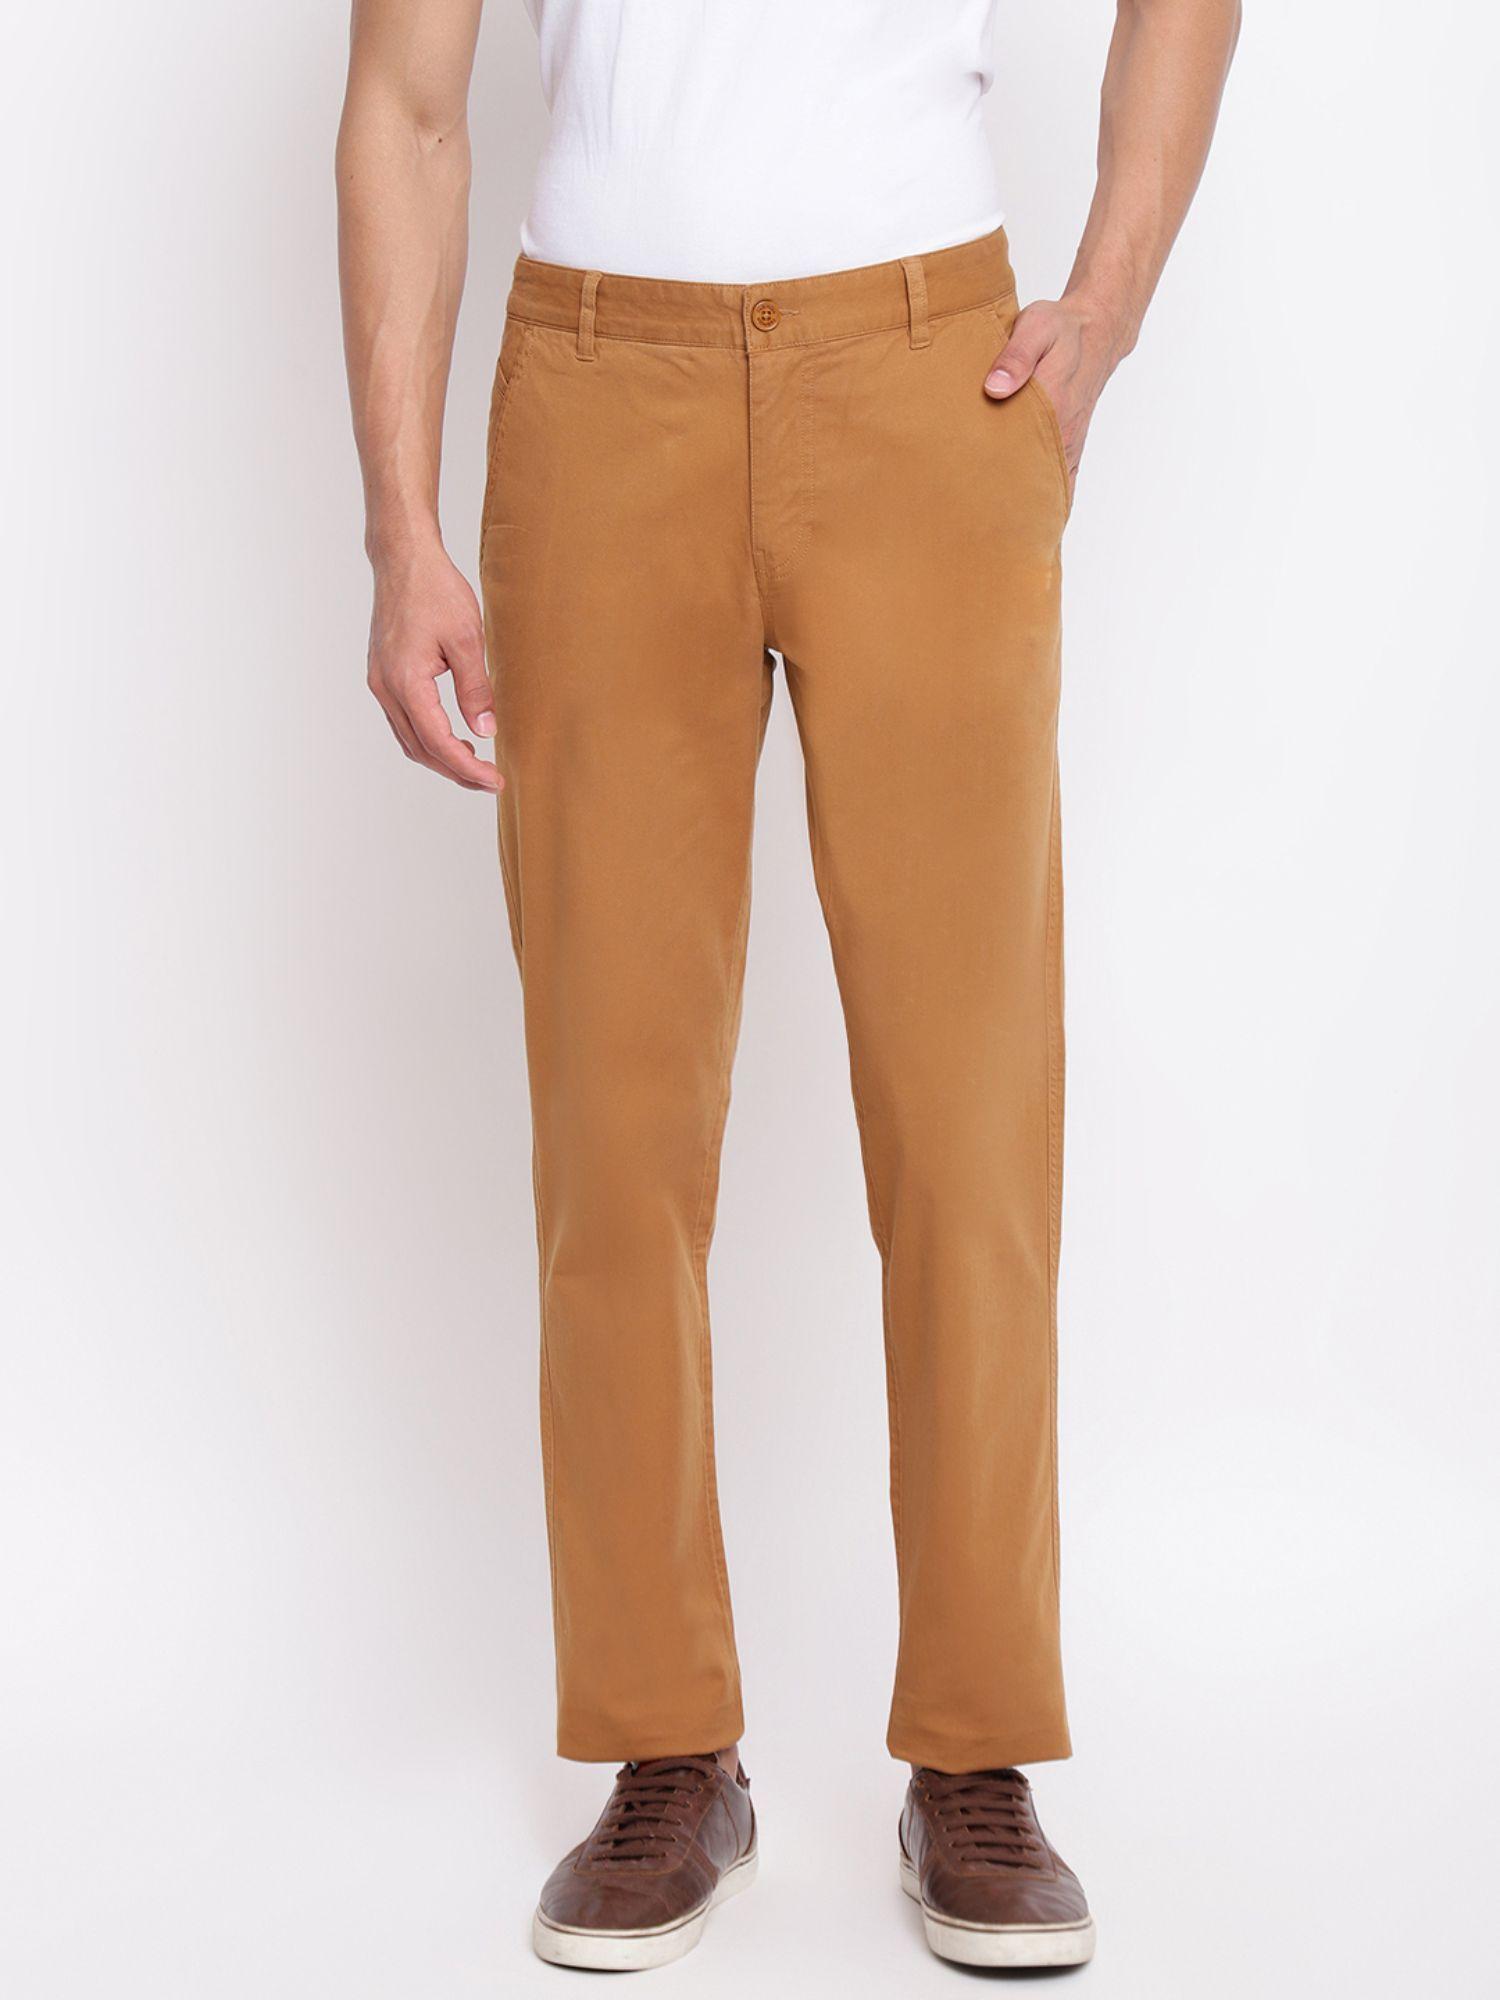 Brown Cotton Solid Trouser